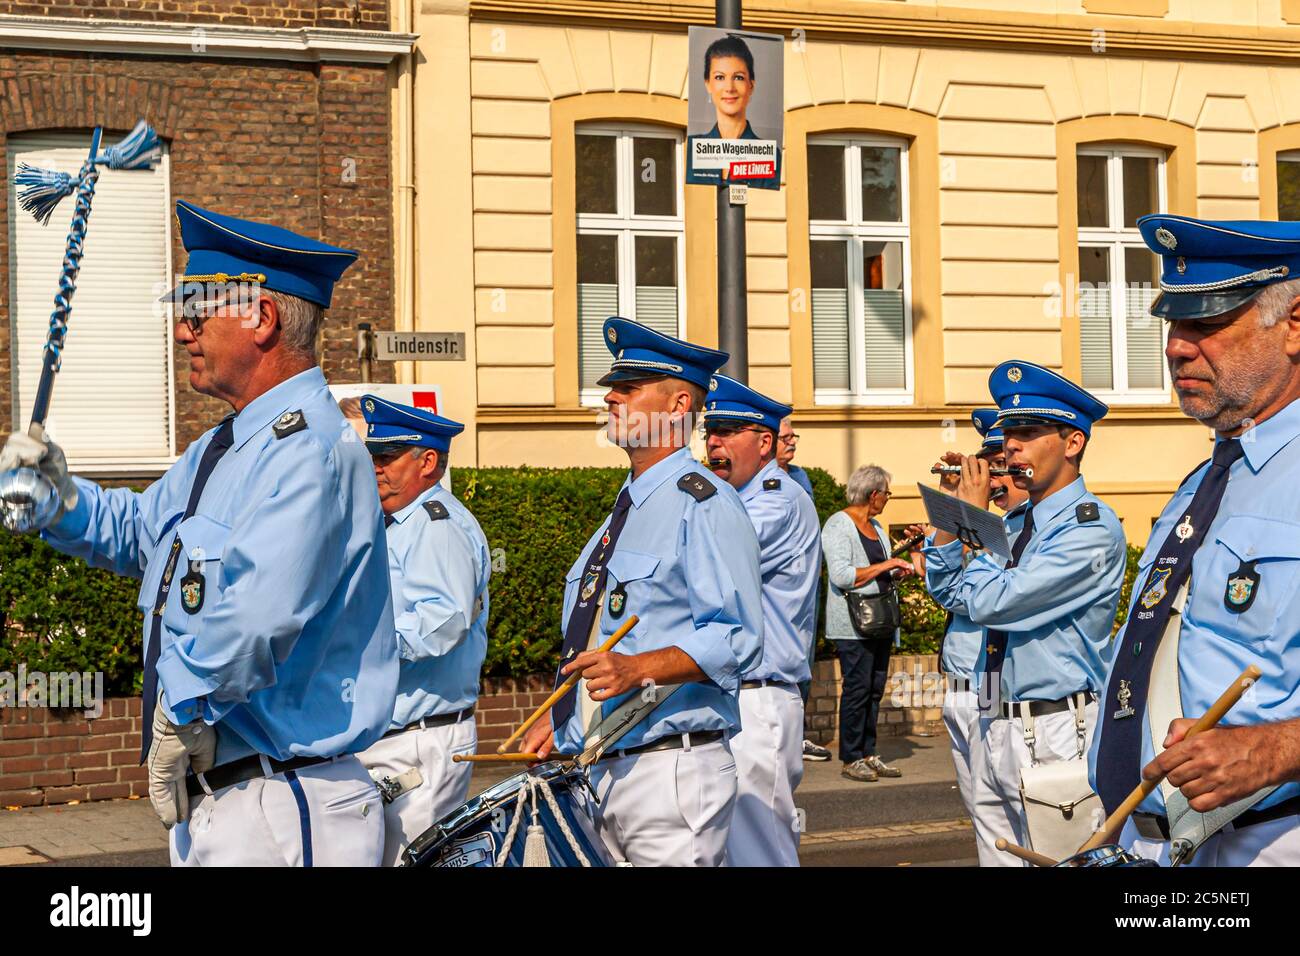 Election poster with the top candidate of the Left Party, Sahra Wagenknecht in front of which uniformed participants of a Schützenfest march by. Funfair in Grevenbroich, Germany Stock Photo